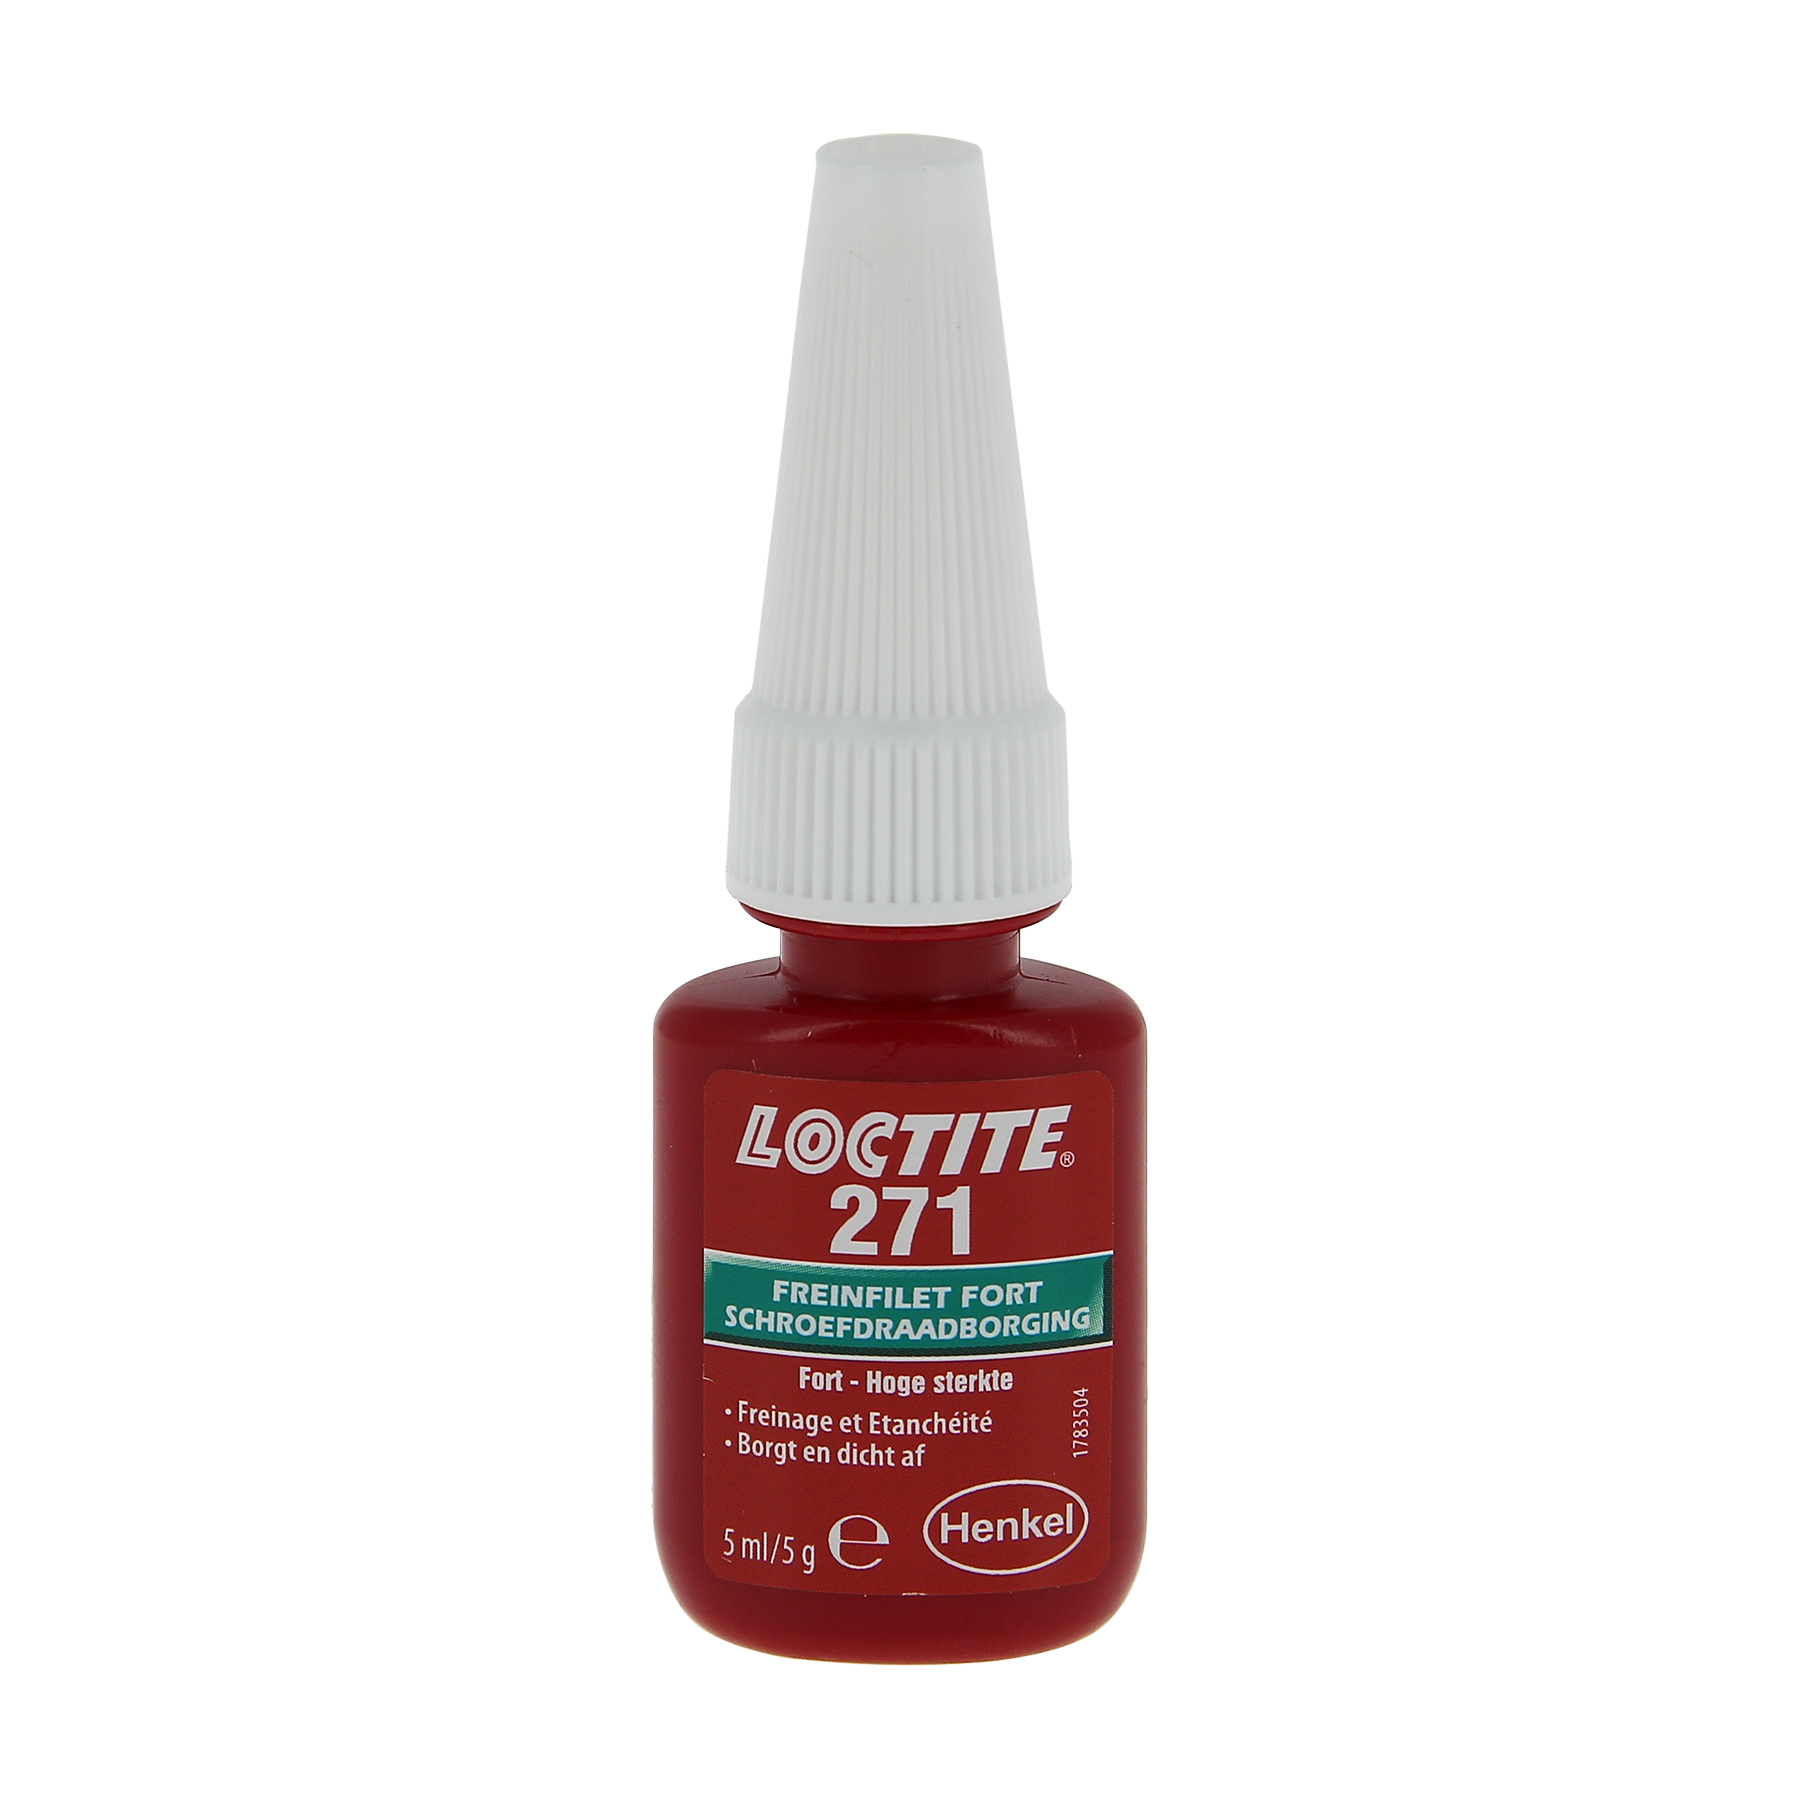 LOCTITE 271 freinfilet fort 5ml